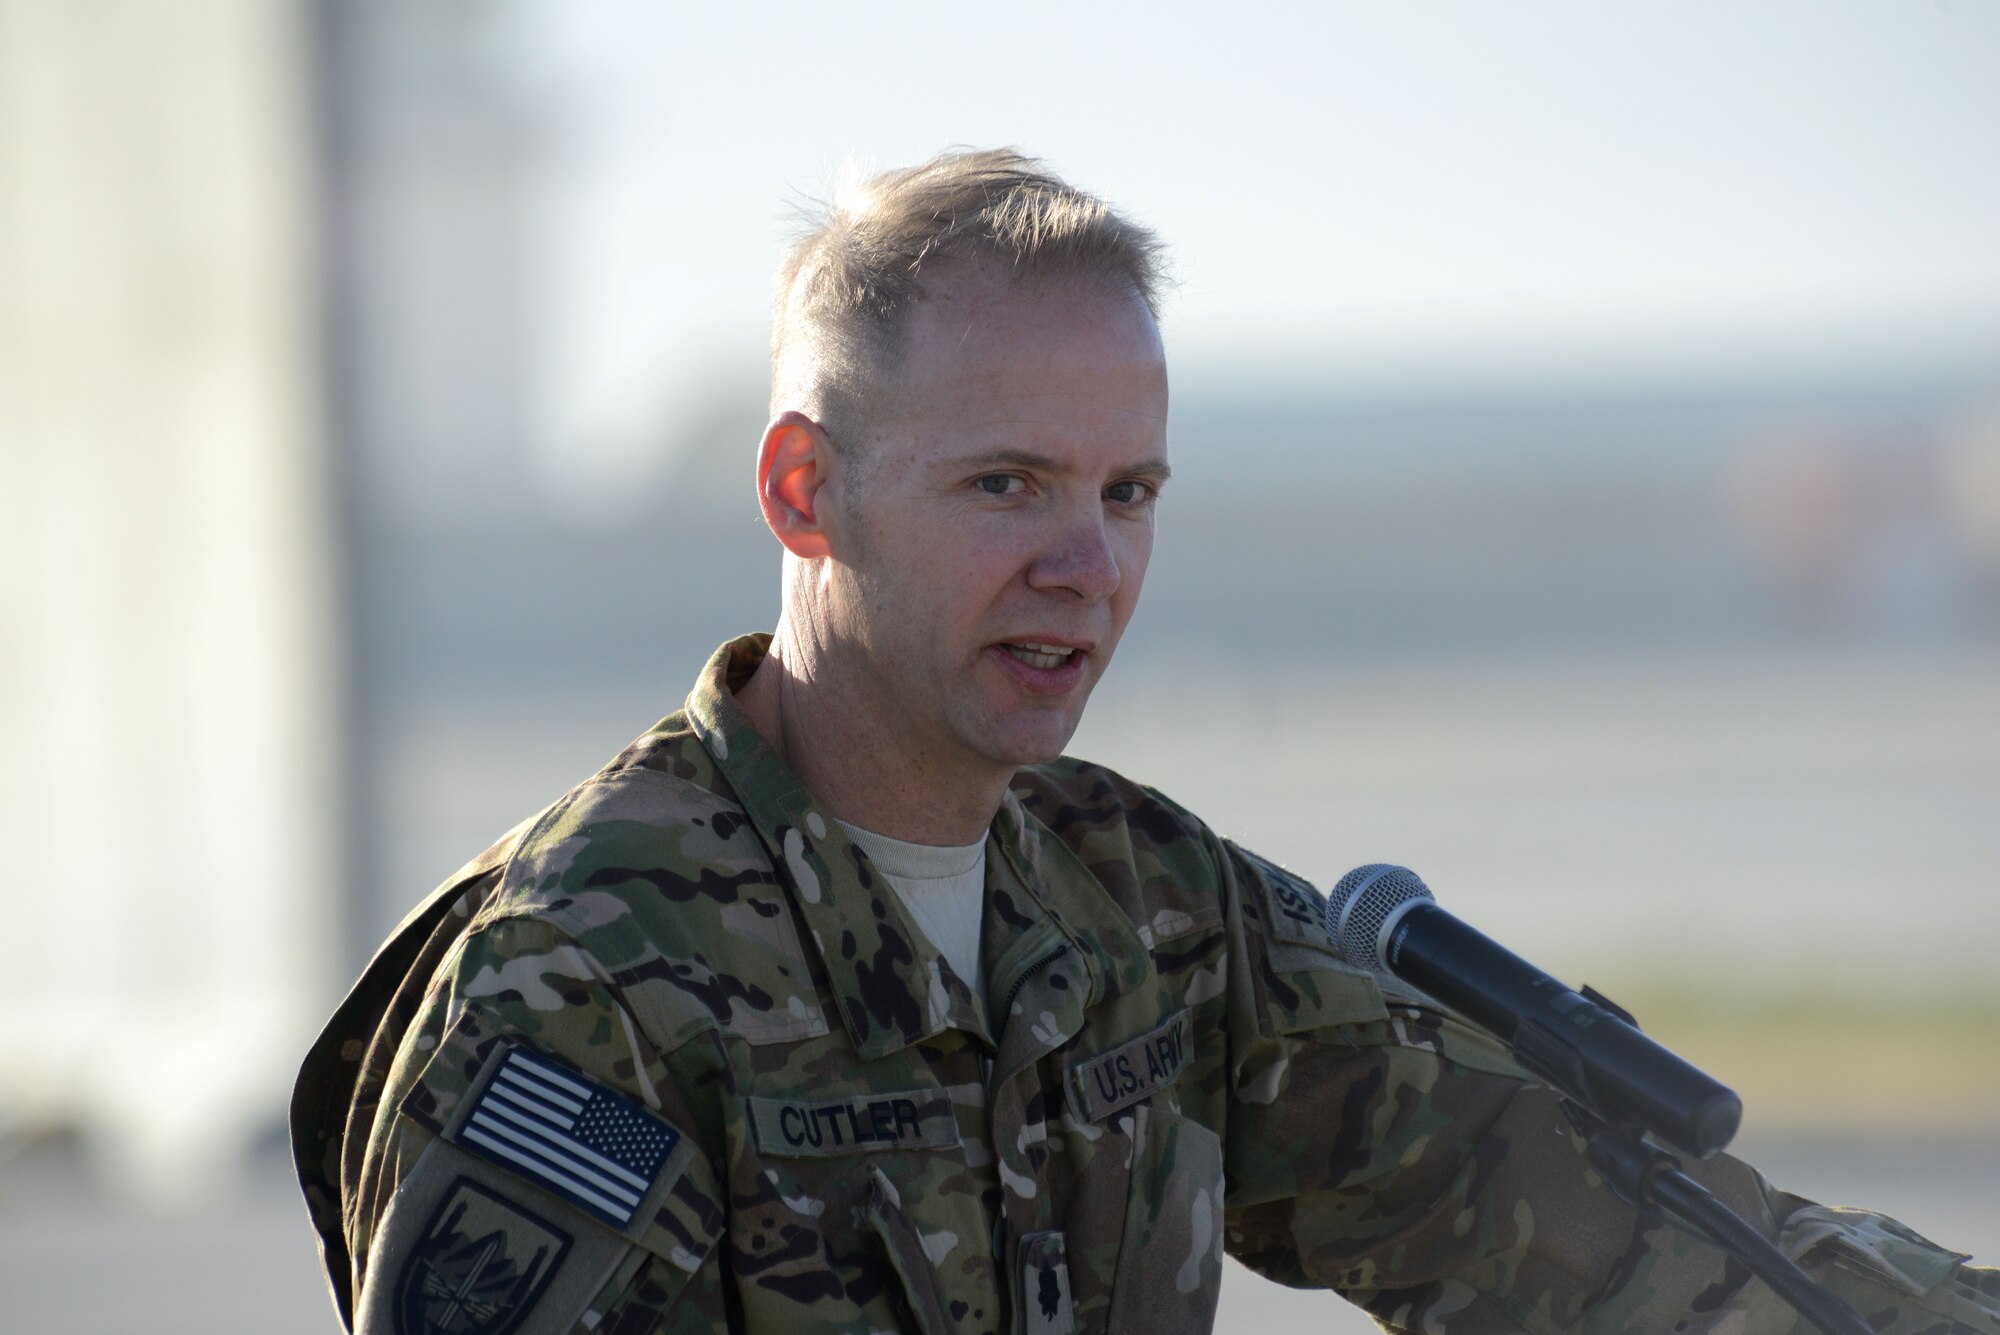 U.S. Army Lt. Col Christopher S. Cutler, commander 306th Military Intelligence Battalion, Joint Task Force Odin, makes closing remarks during the MC-12W transition of authority ceremony at Bagram Airfield, Afghanistan Oct. 1, 2014. The 4 ERS inactivated and Joint Task Force Thor is now the lead for the MC-12W mission. (U.S. Air Force photo by Master Sgt. Cohen A. Young/Released)